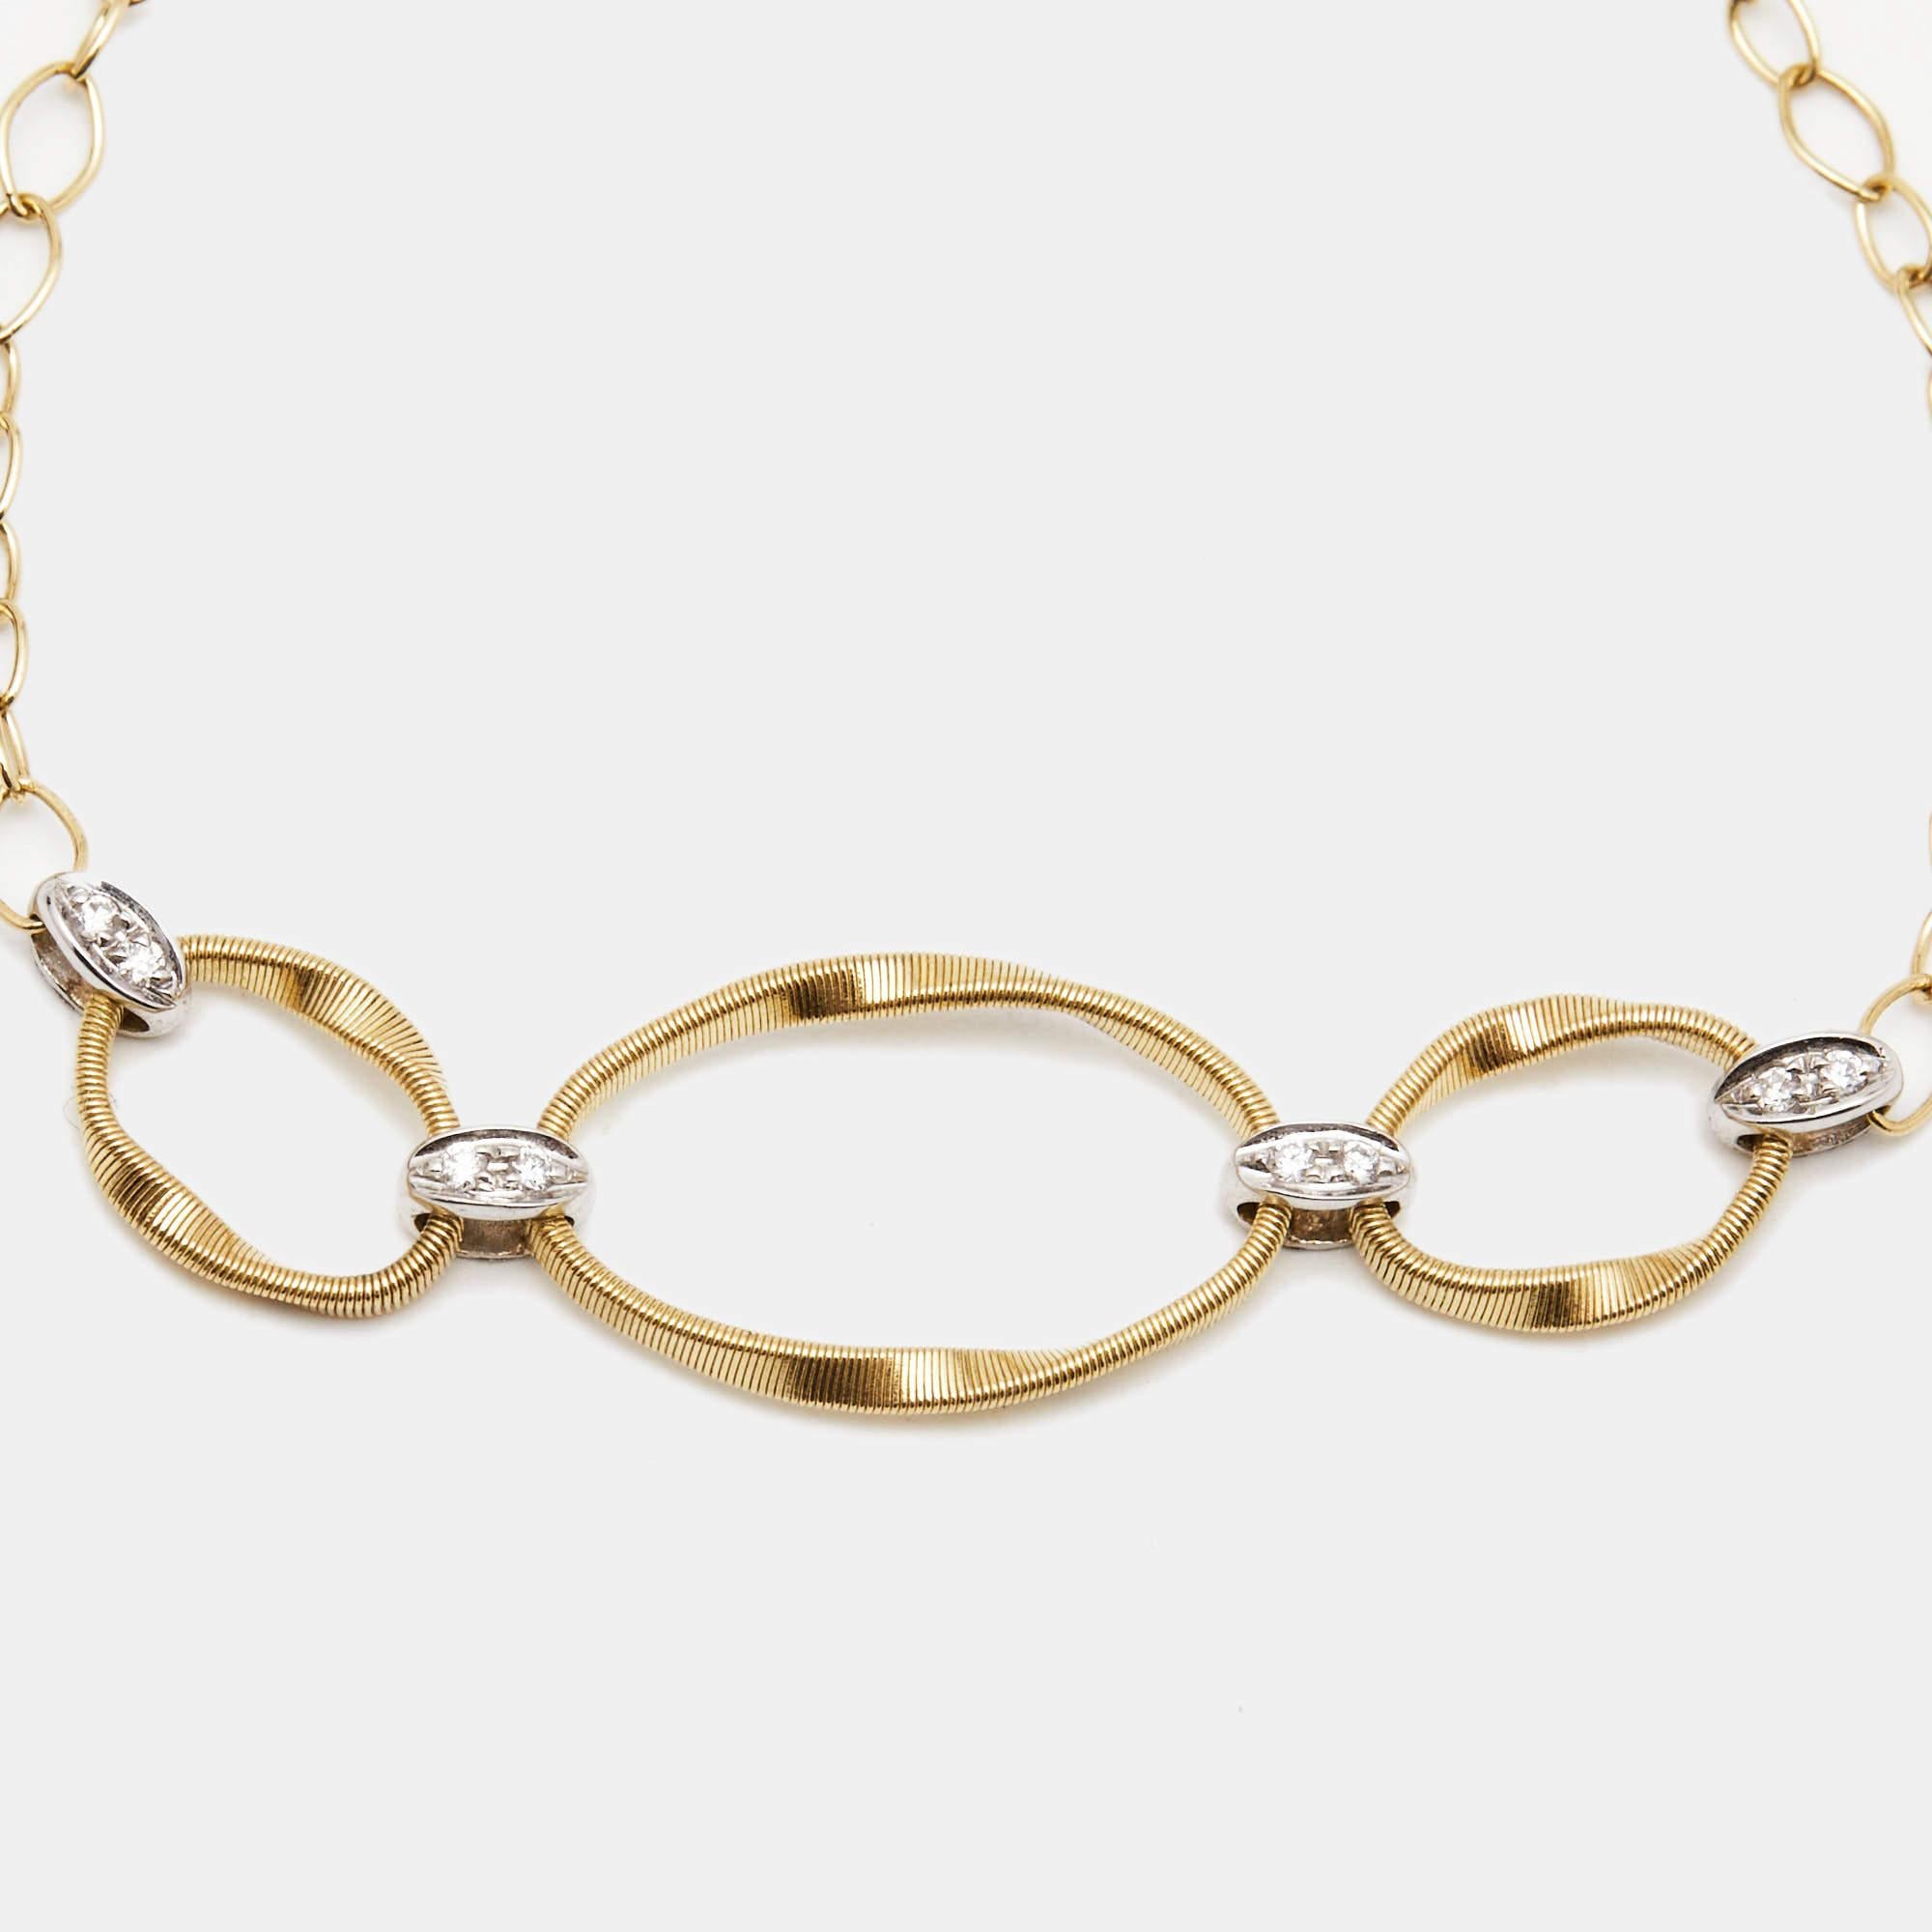 The Marco Bicego bracelet is a luxurious and elegant piece of jewelry. Crafted in 18k two-tone gold, it features a distinctive link design that exudes modernity and sophistication. Adorned with sparkling diamonds, the Marrakech Onde bracelet adds a